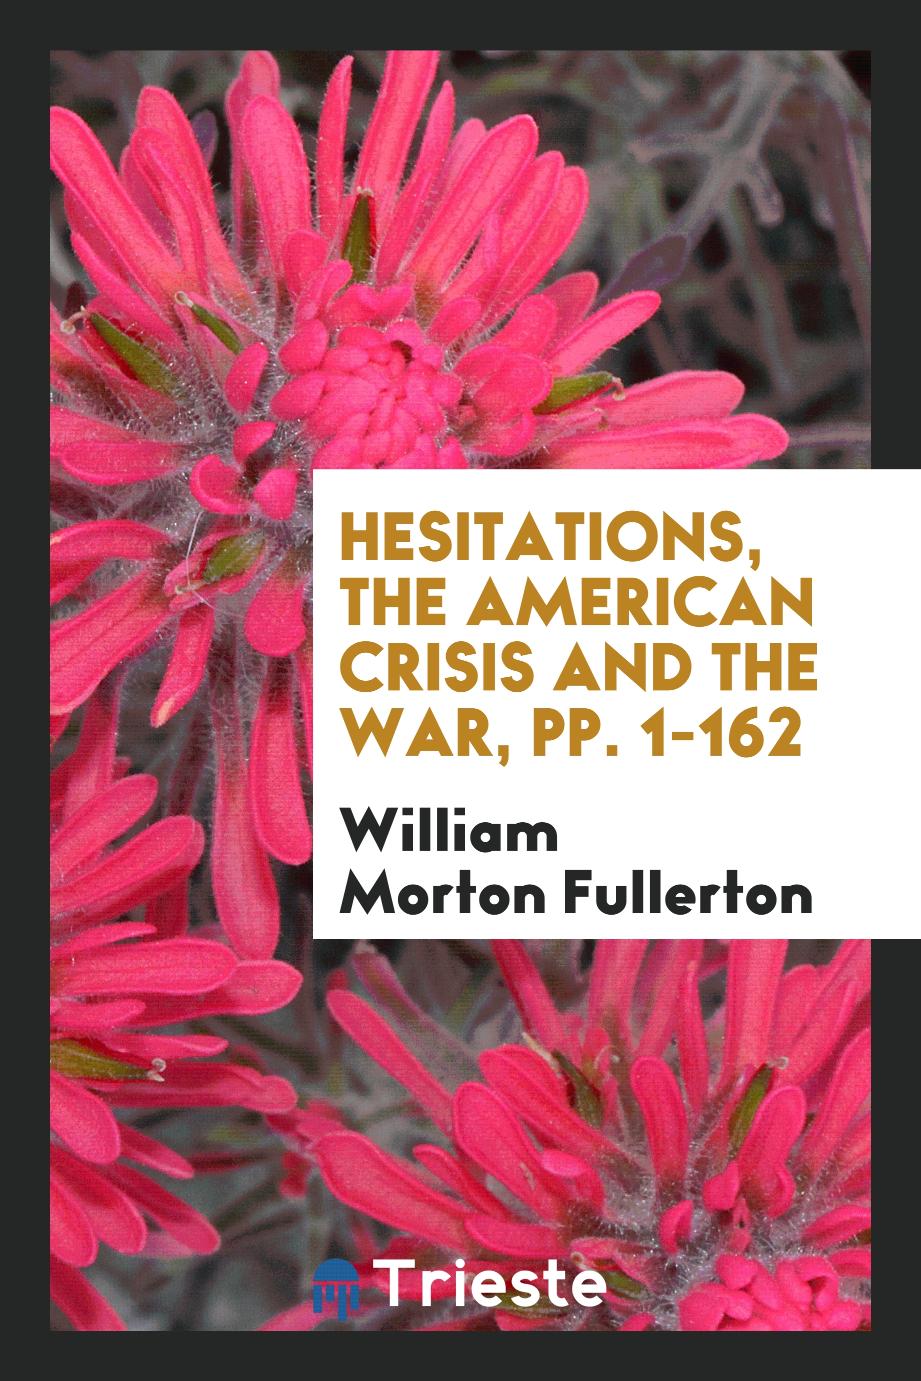 Hesitations, the American Crisis and the War, pp. 1-162